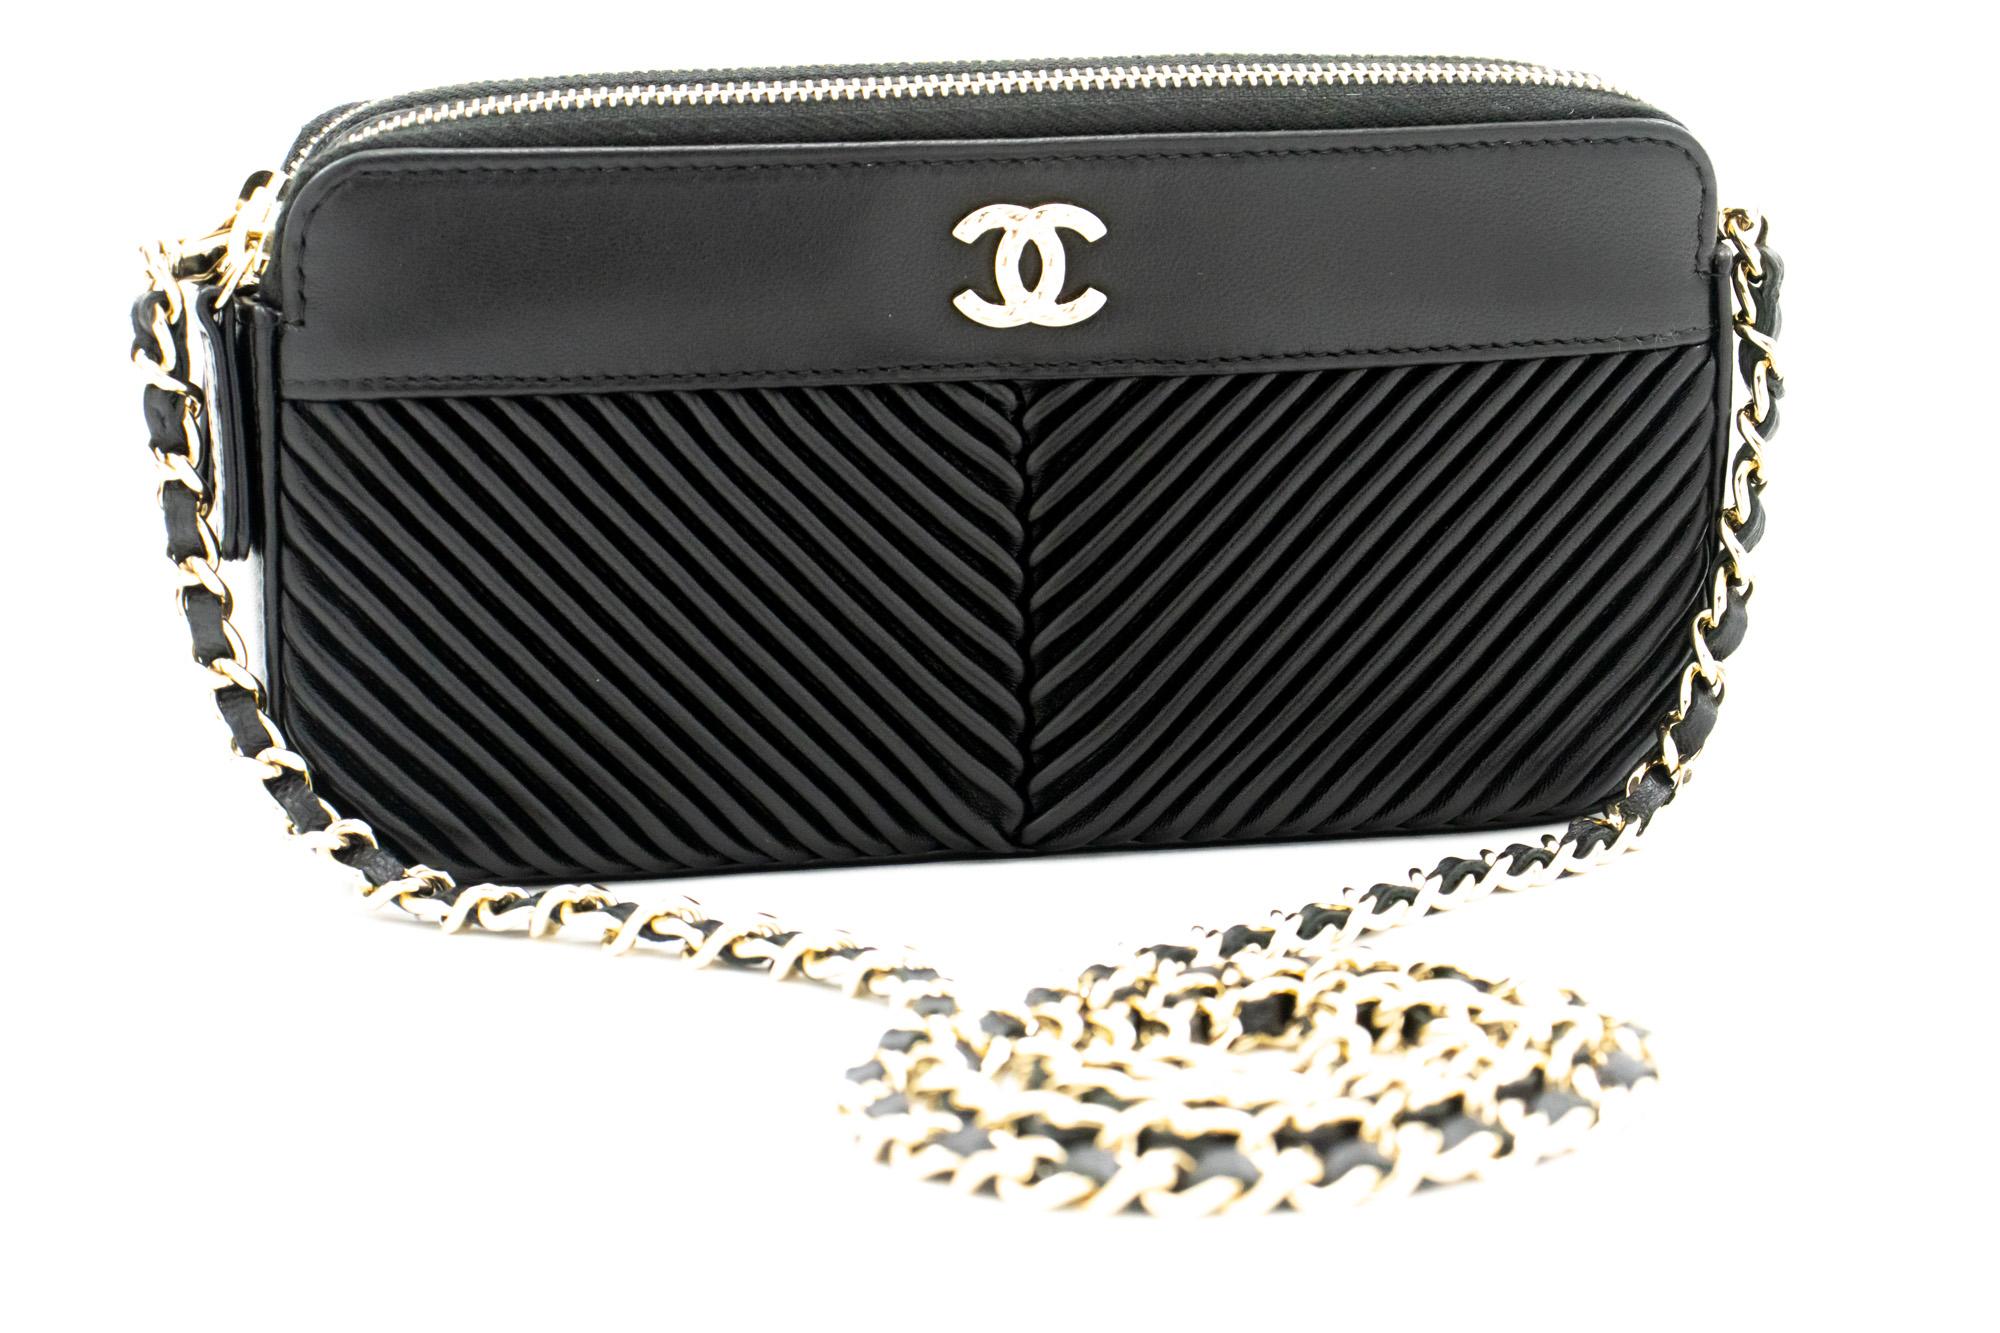 An authentic CHANEL V-Stitch made of black Lambskin Wallet On Chain WOC Double Zip Chain Bag. The color is Black. The outside material is Leather. The pattern is Solid. This item is Contemporary. The year of manufacture would be 2019.
Conditions &